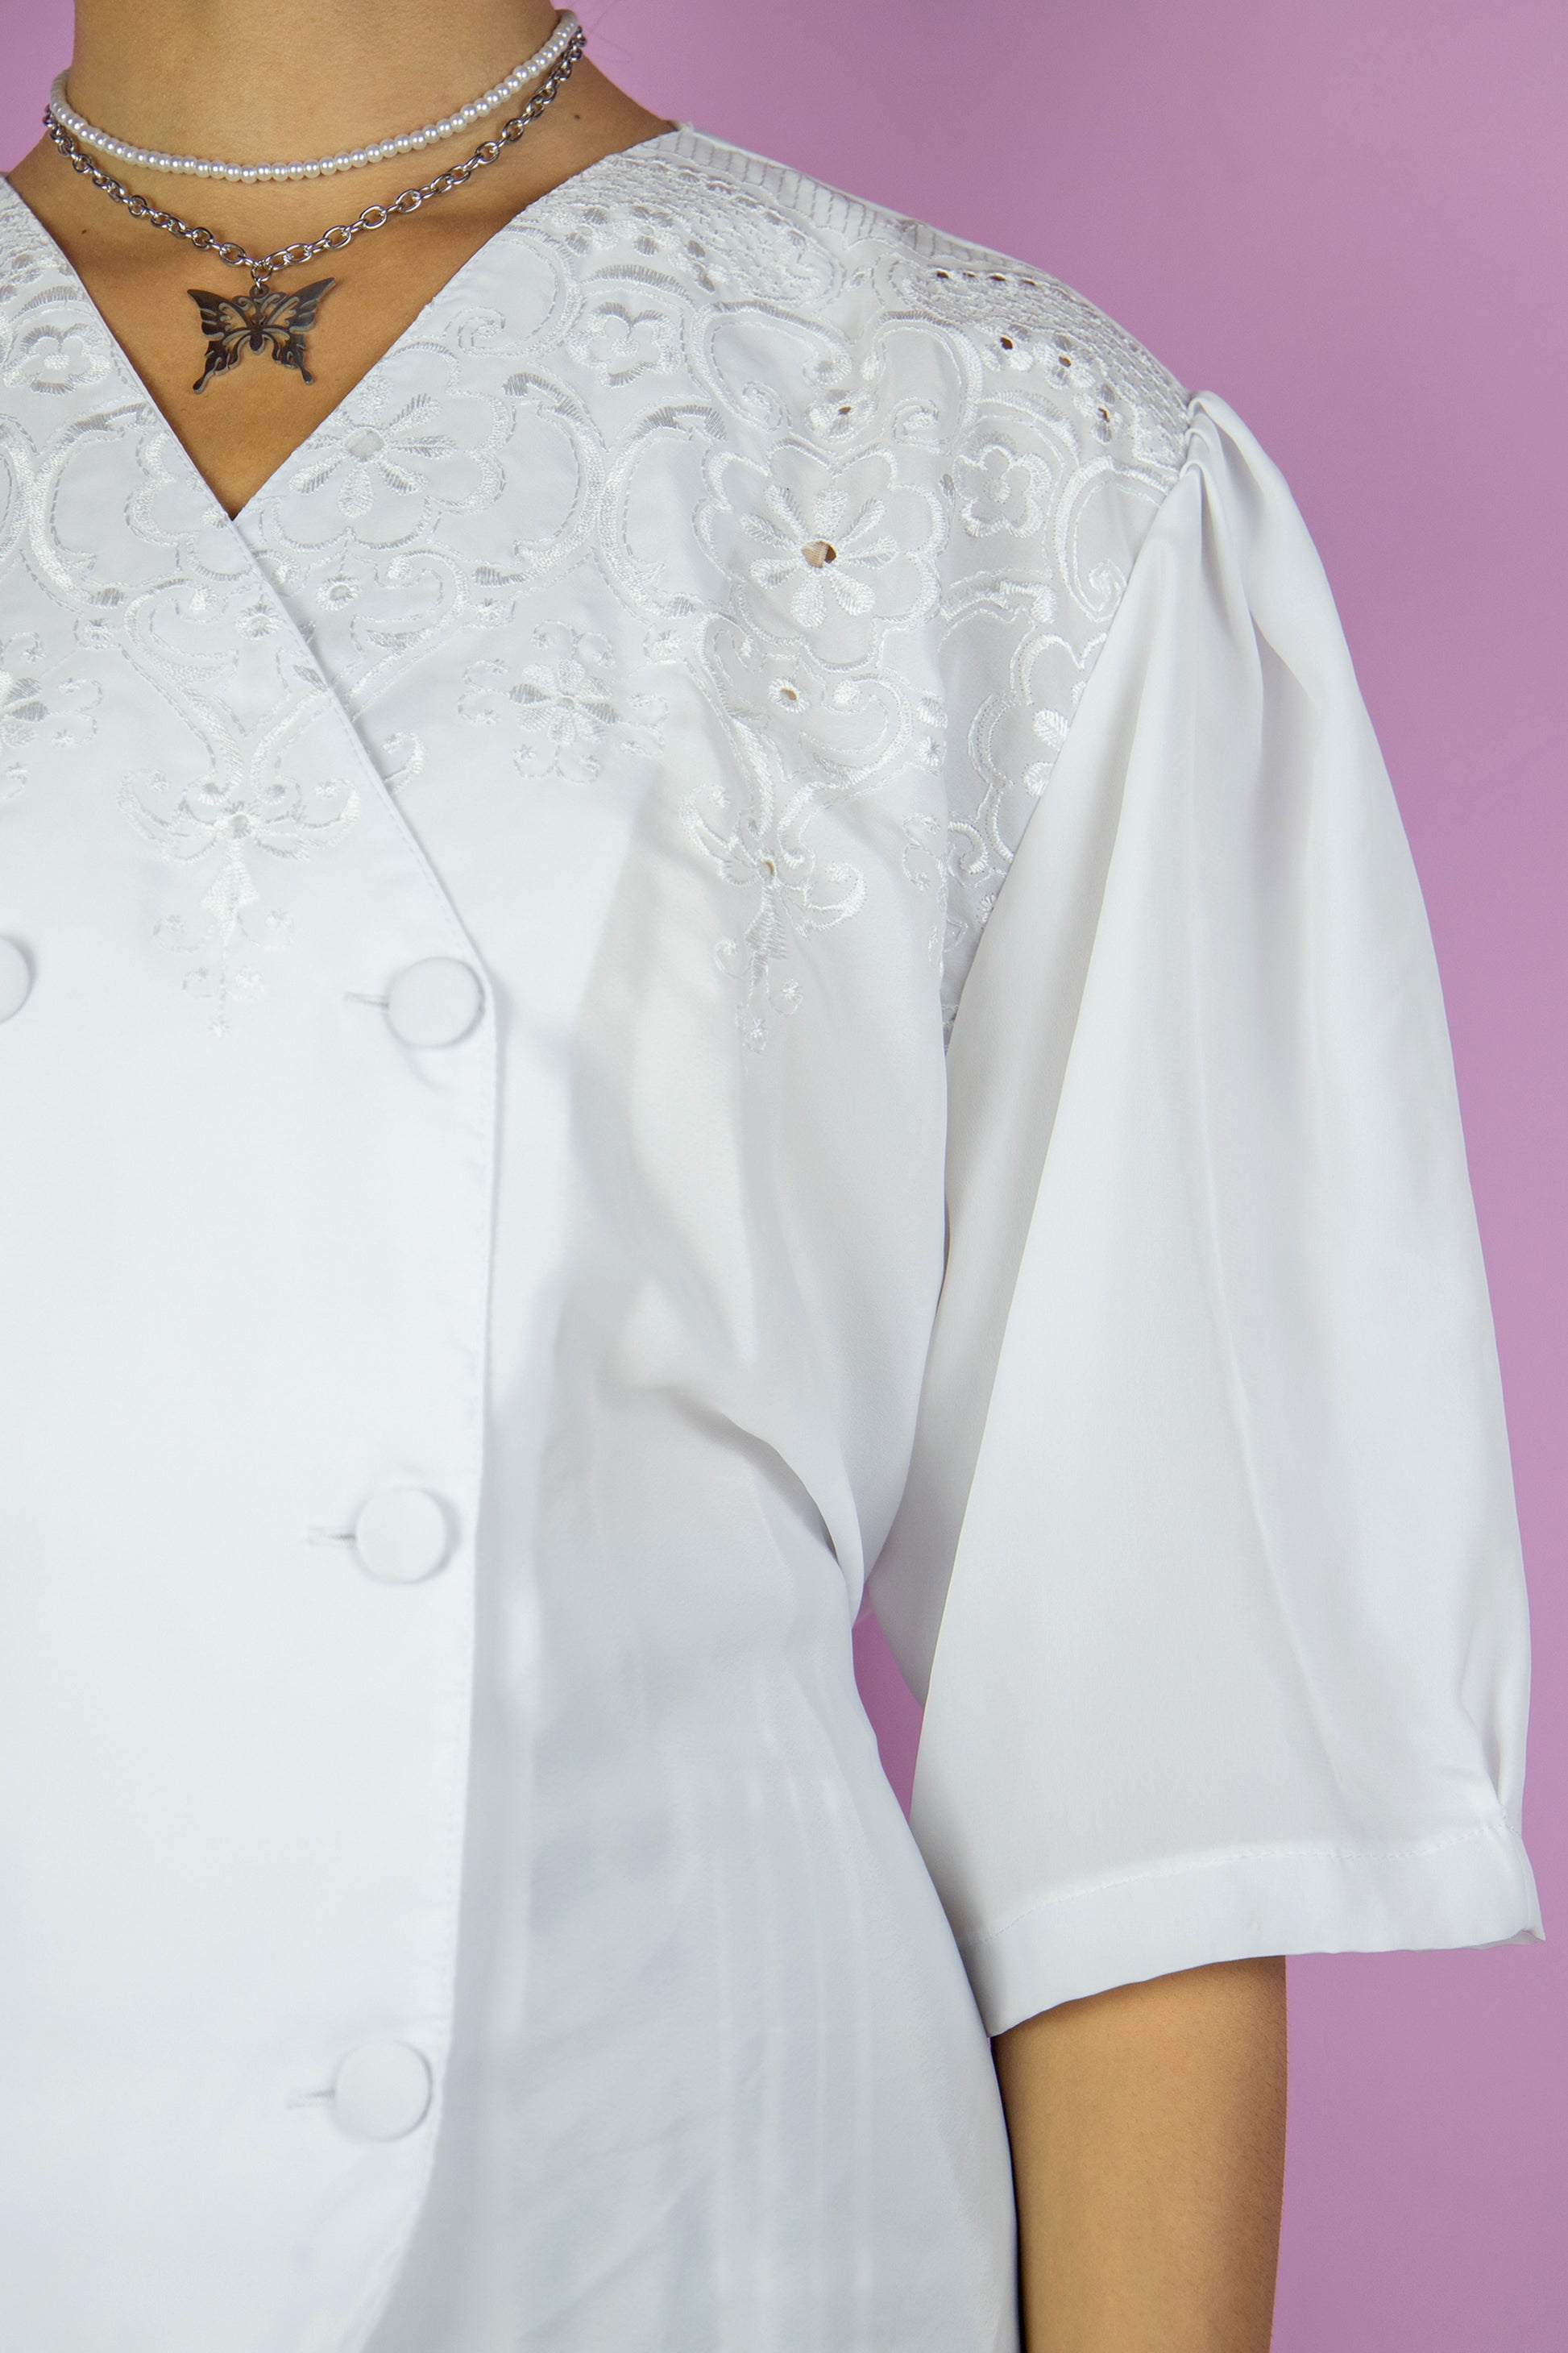 The Vintage 90s White Cottage Blouse is a semi-sheer top with short puff sleeves, a double row of buttons on the front, embroidered details and is tied at the back. Romantic country prairie 1990s boho summer shirt.